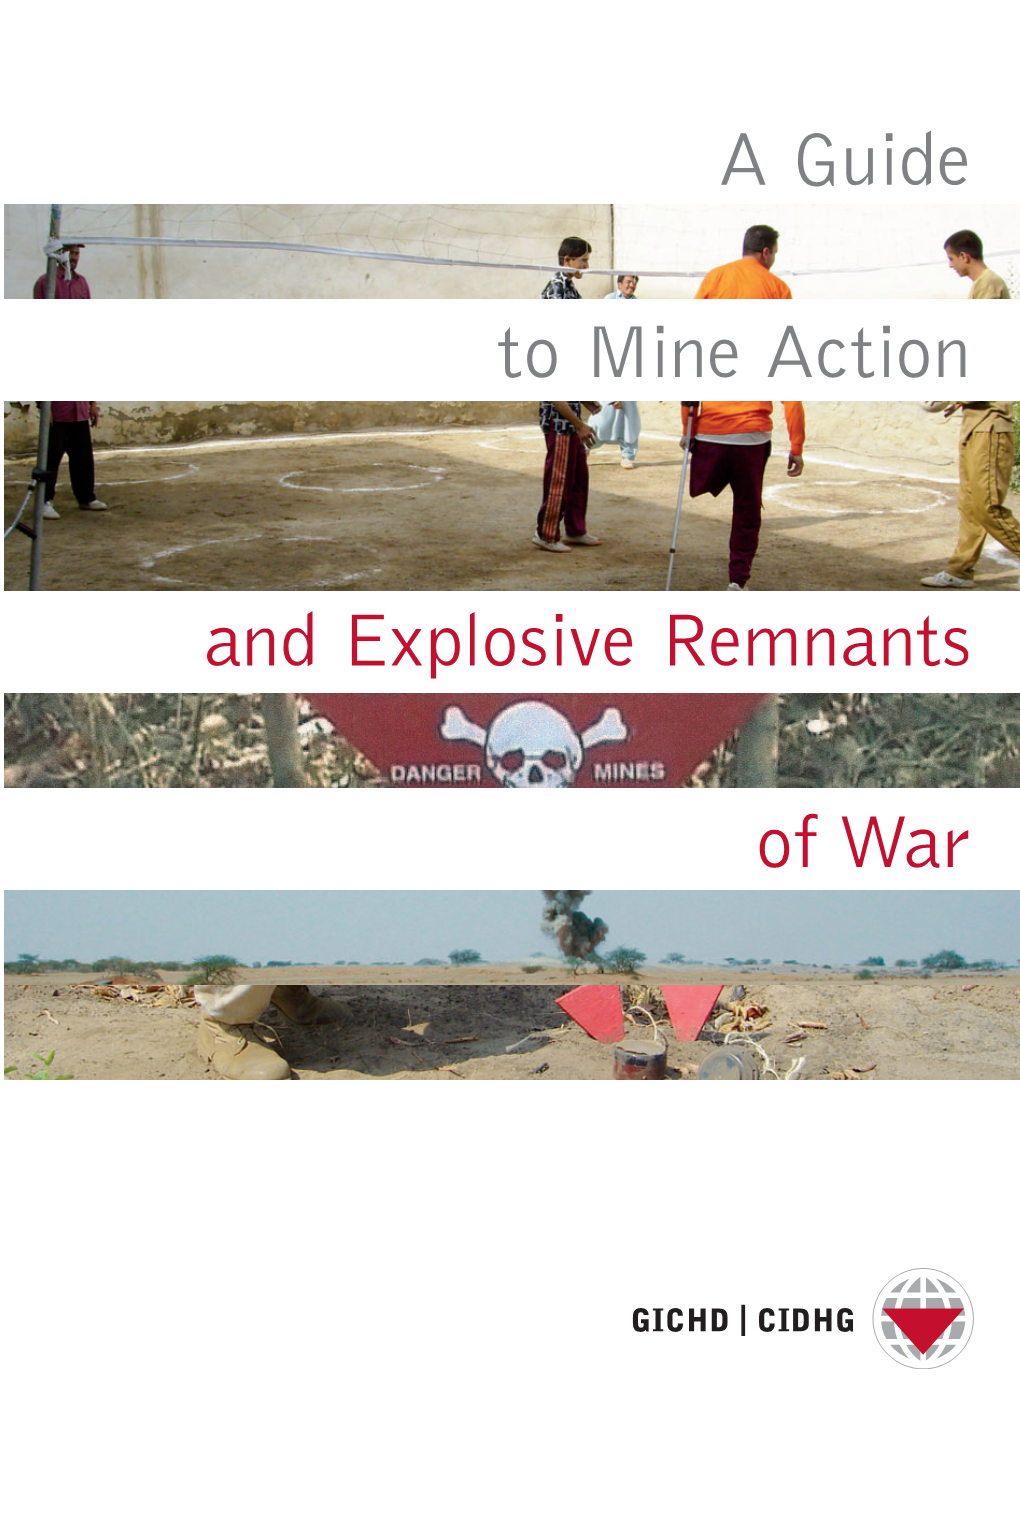 A Guide to Mine Action and Explosive Remnants of War,Third Edition, GICHD, Geneva, April 2007